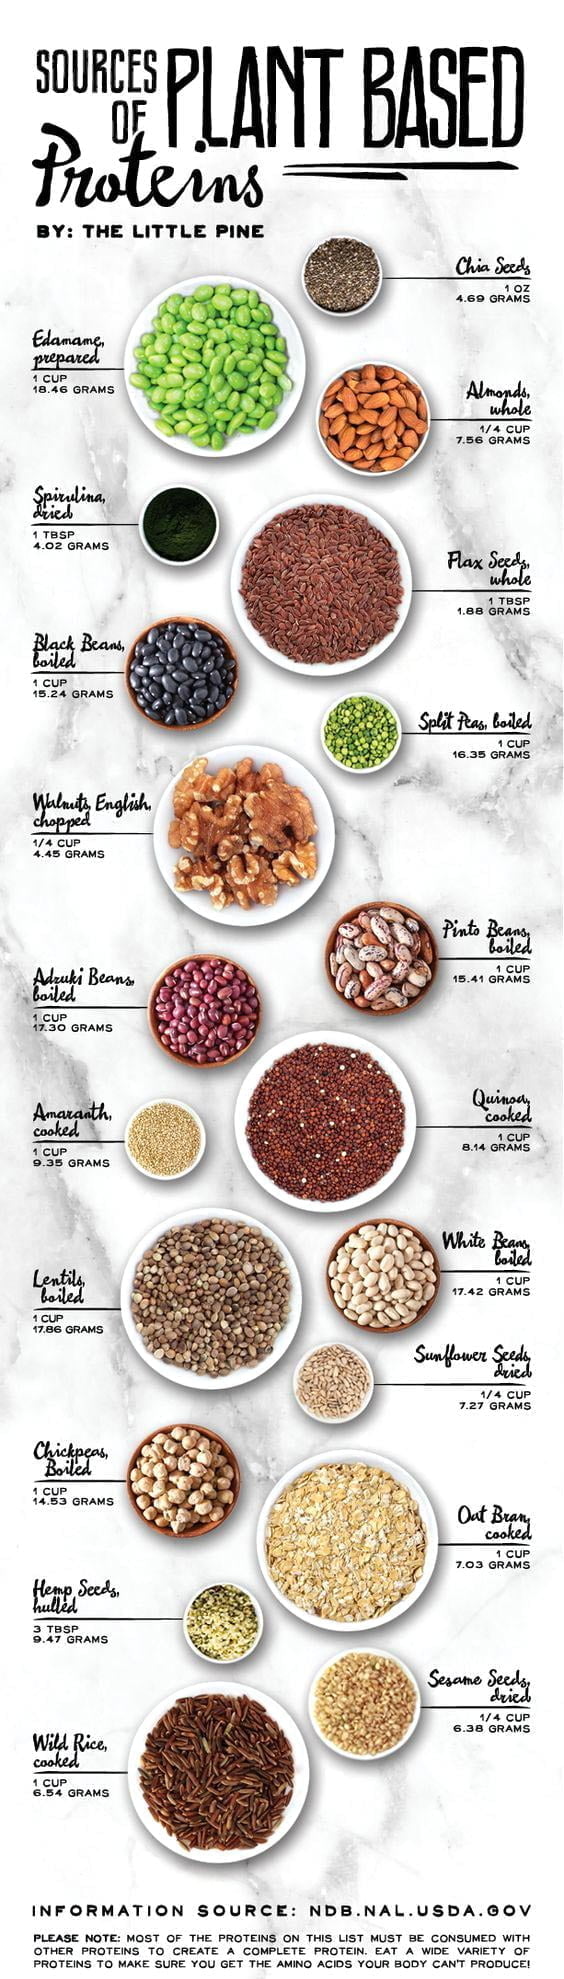 plant-based-proteins